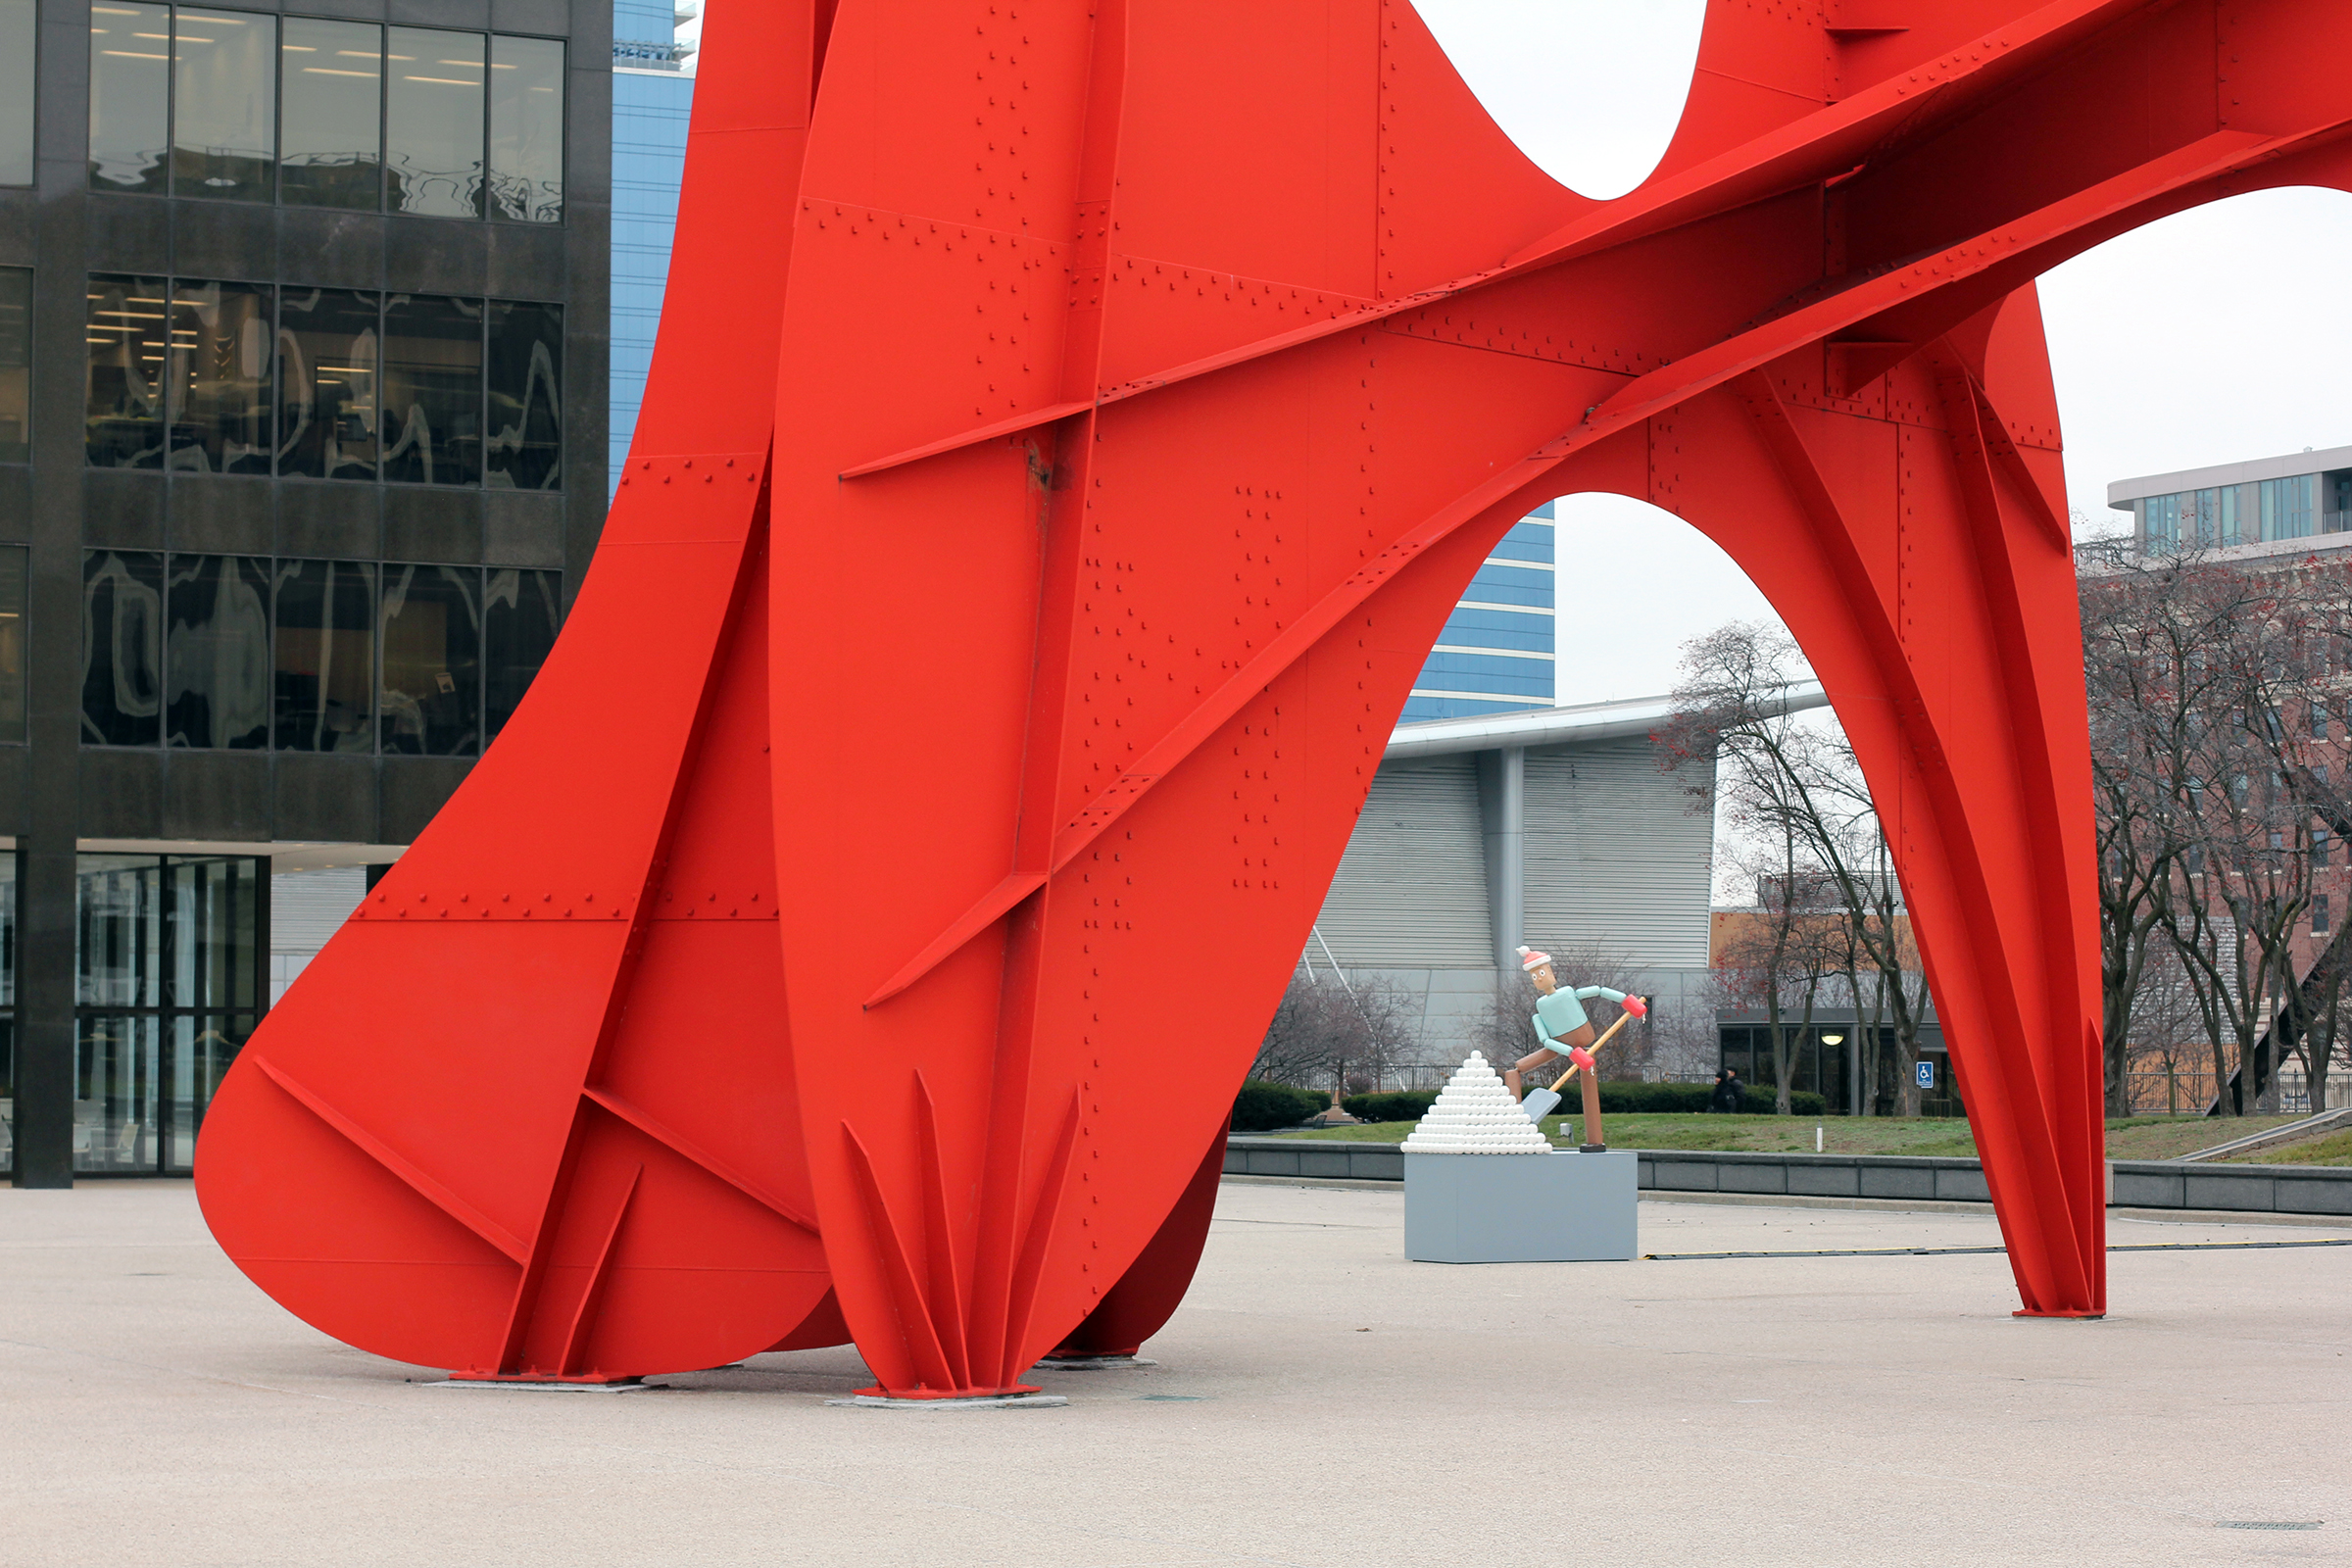 a life-size push puppet sculpture in a concrete plaza with a two-story red, metal, abstract sculpture in the foreground